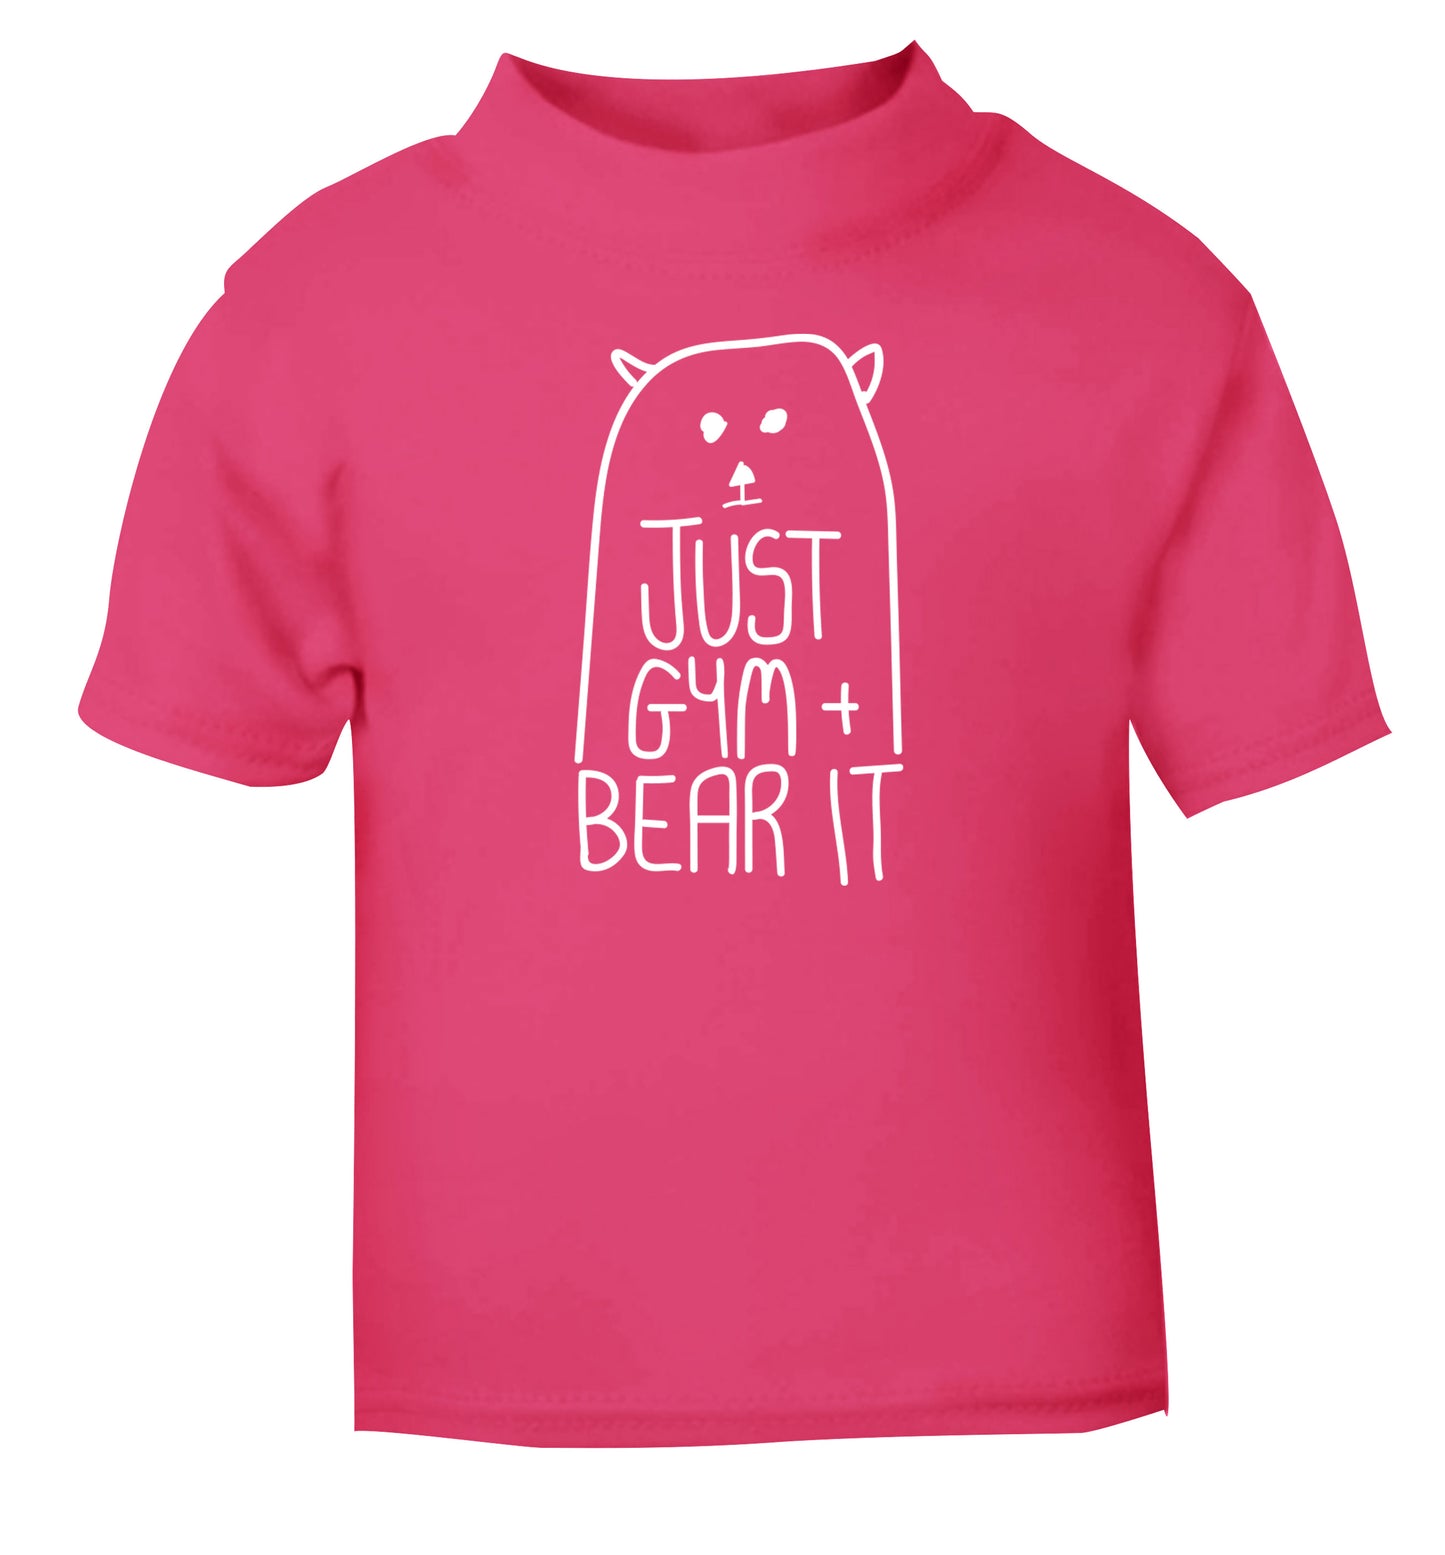 Just gym and bear it pink Baby Toddler Tshirt 2 Years